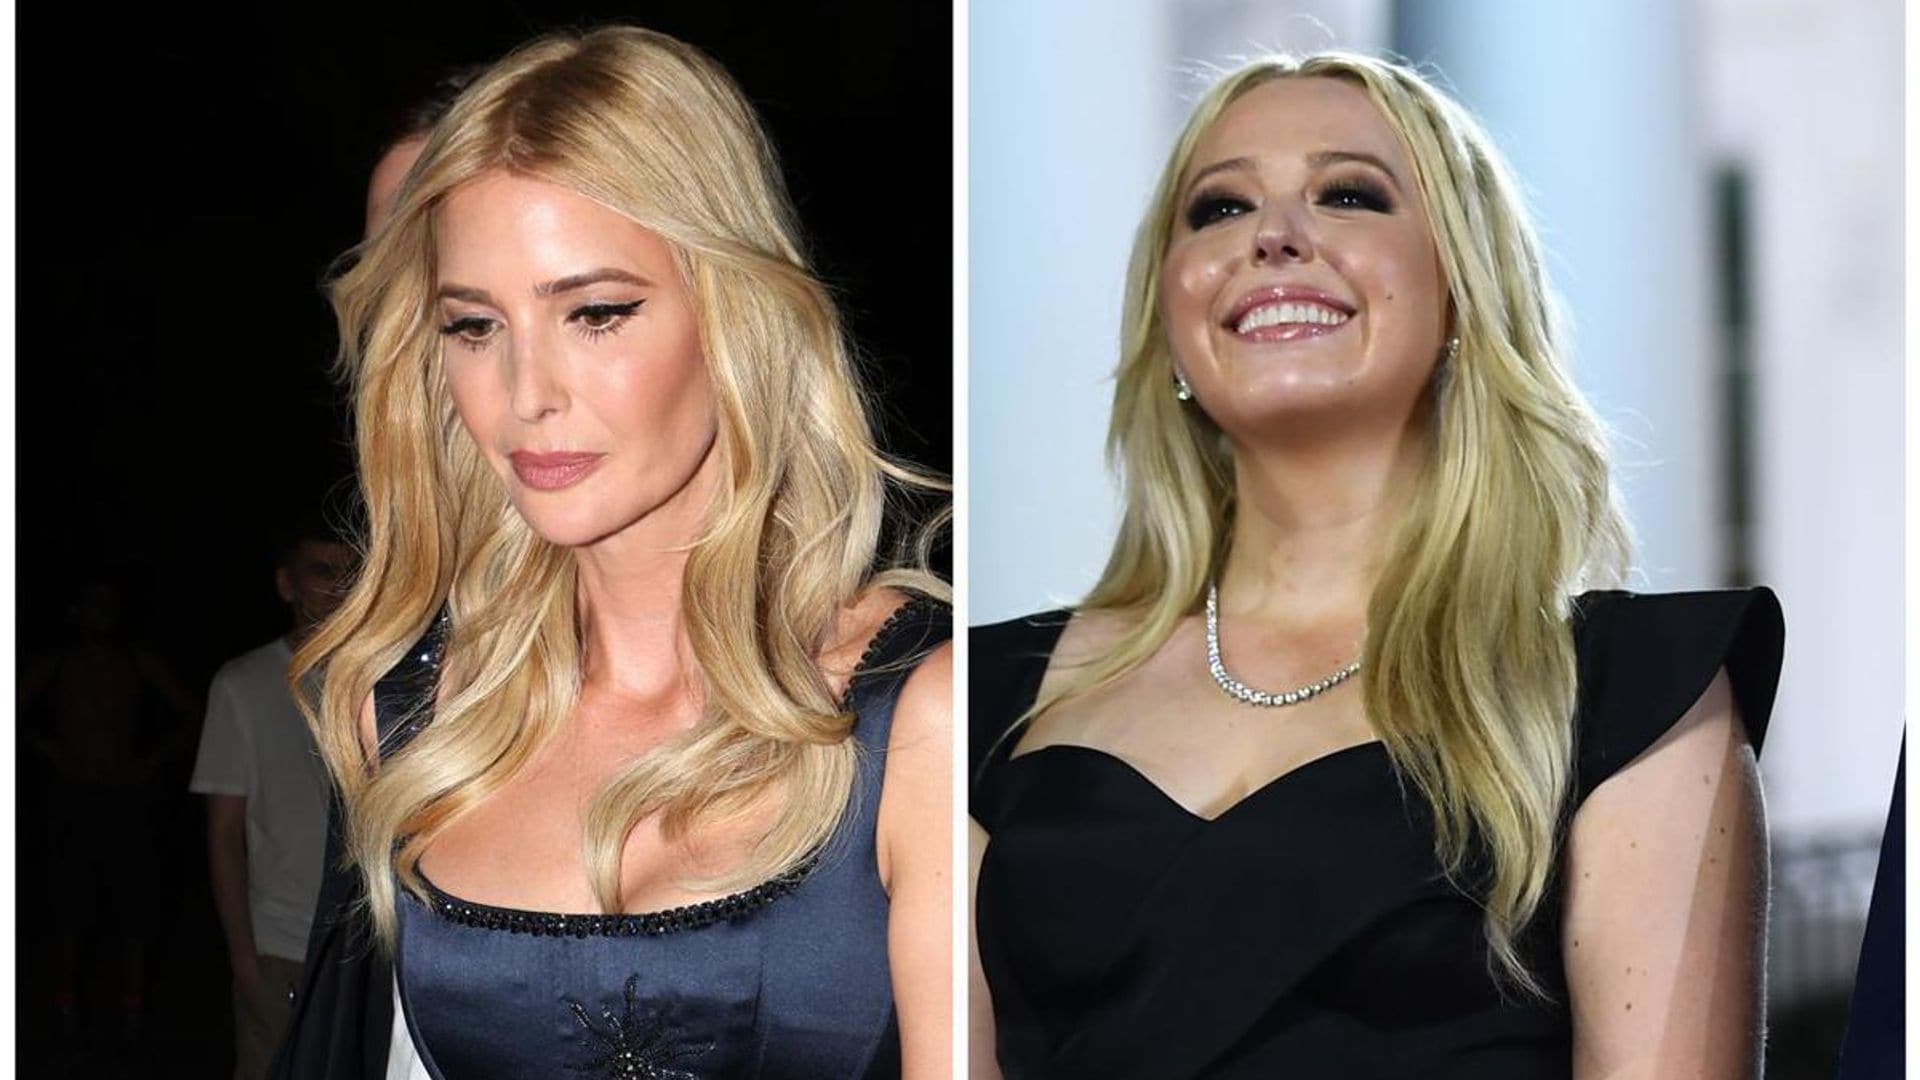 Ivanka and Tiffany Trump’s differences growing up: ‘She always handled herself with class’